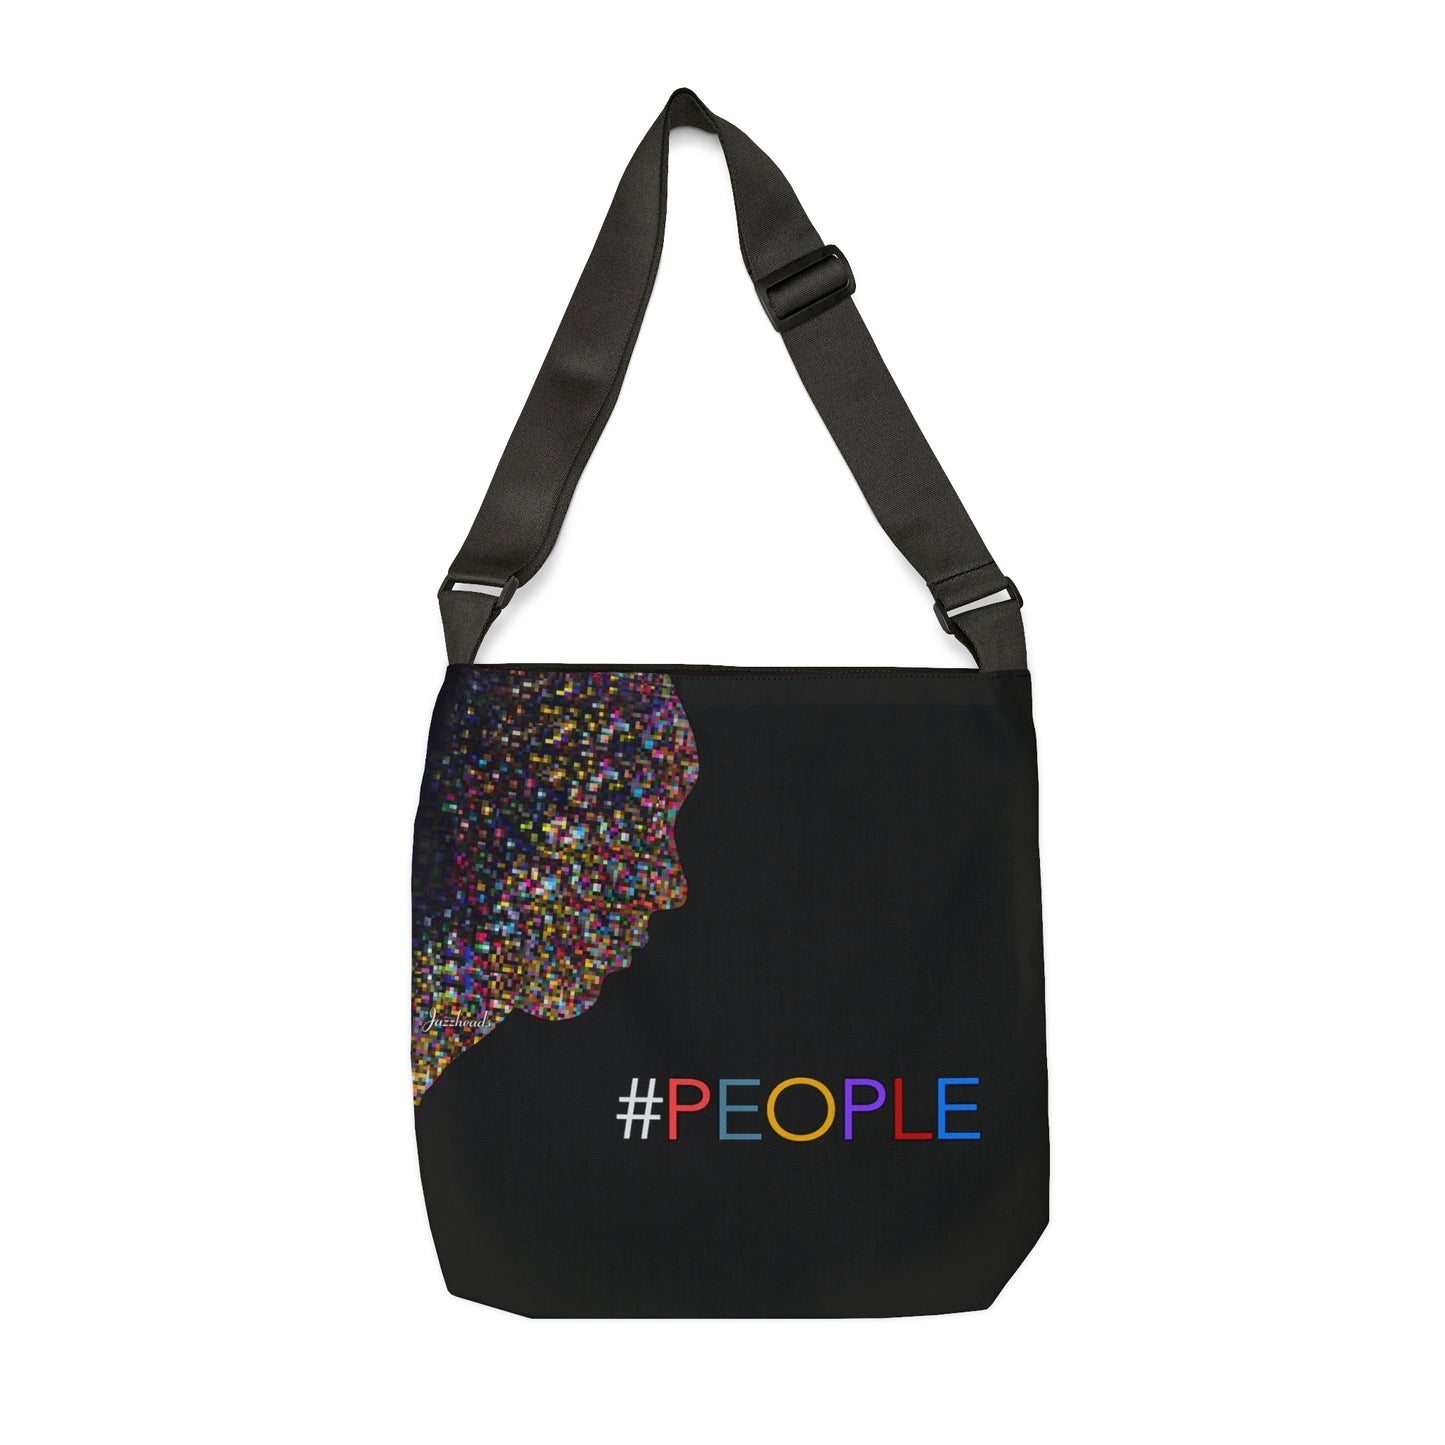 #PEOPLE - Coolest Tote Ever!